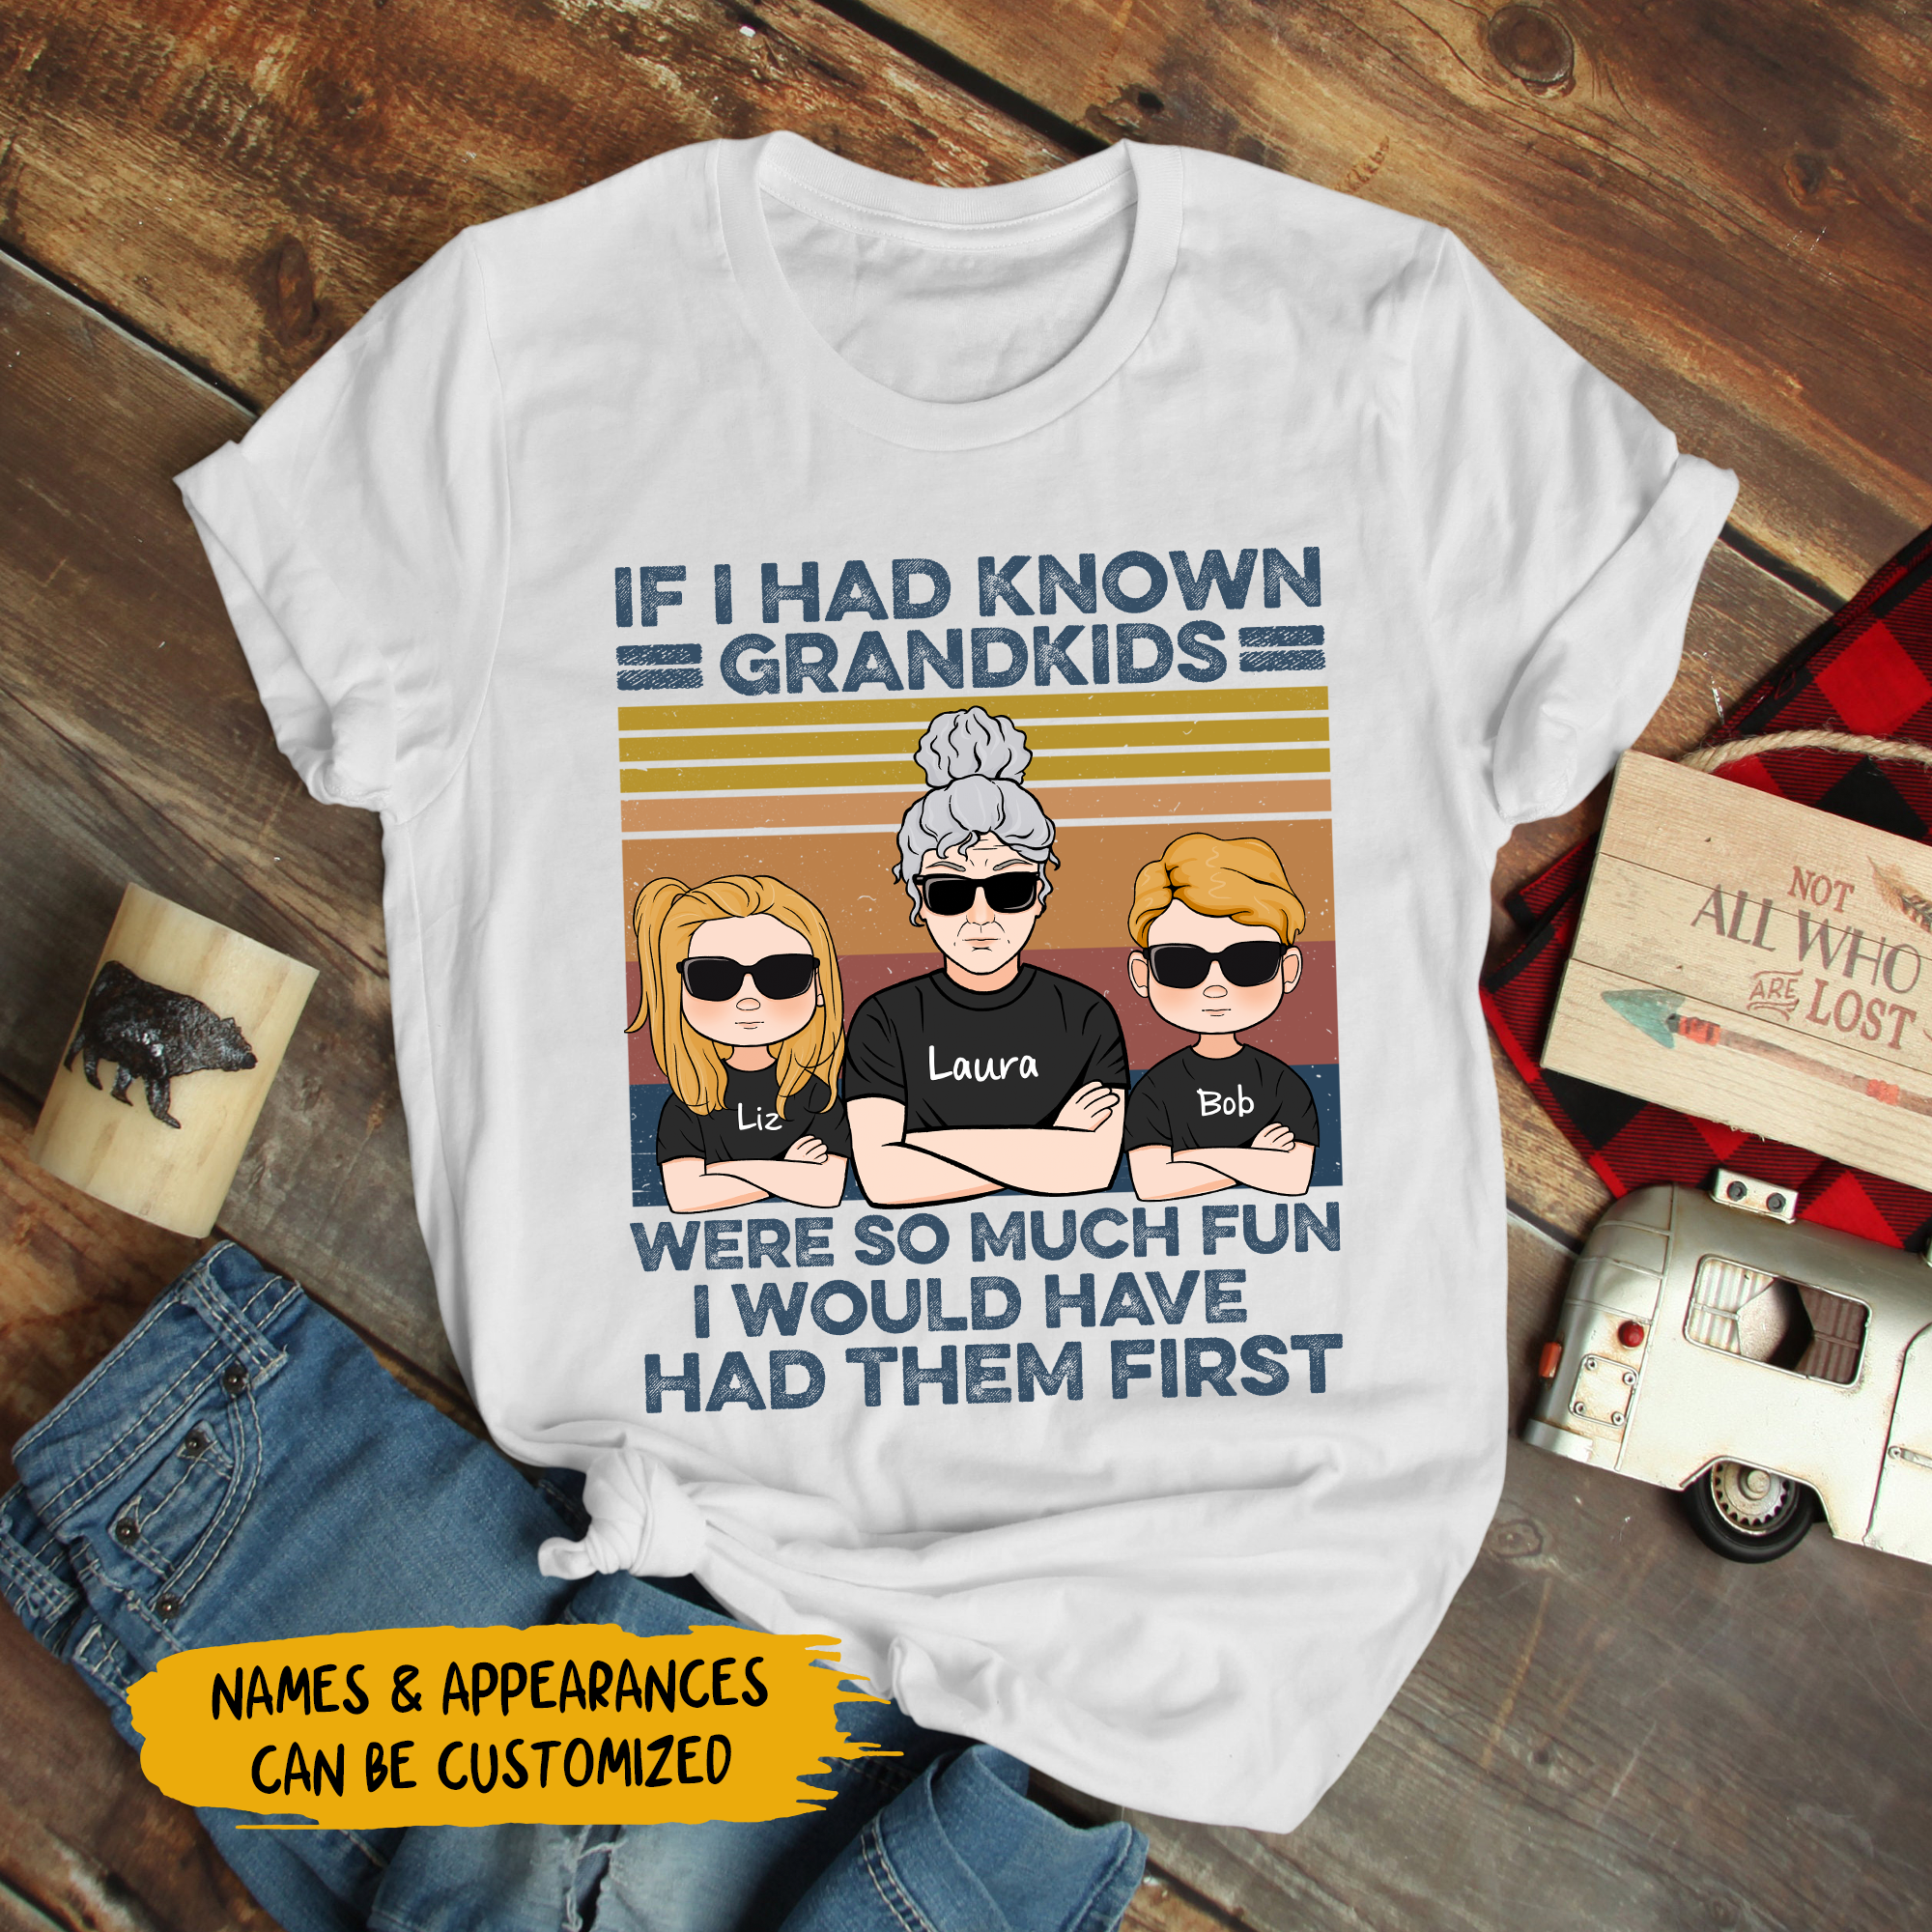 Personalized T-Shirt - Gift For Grandma - If I Had Known Grandkids Were So Much Fun, I Would Have Had Them First